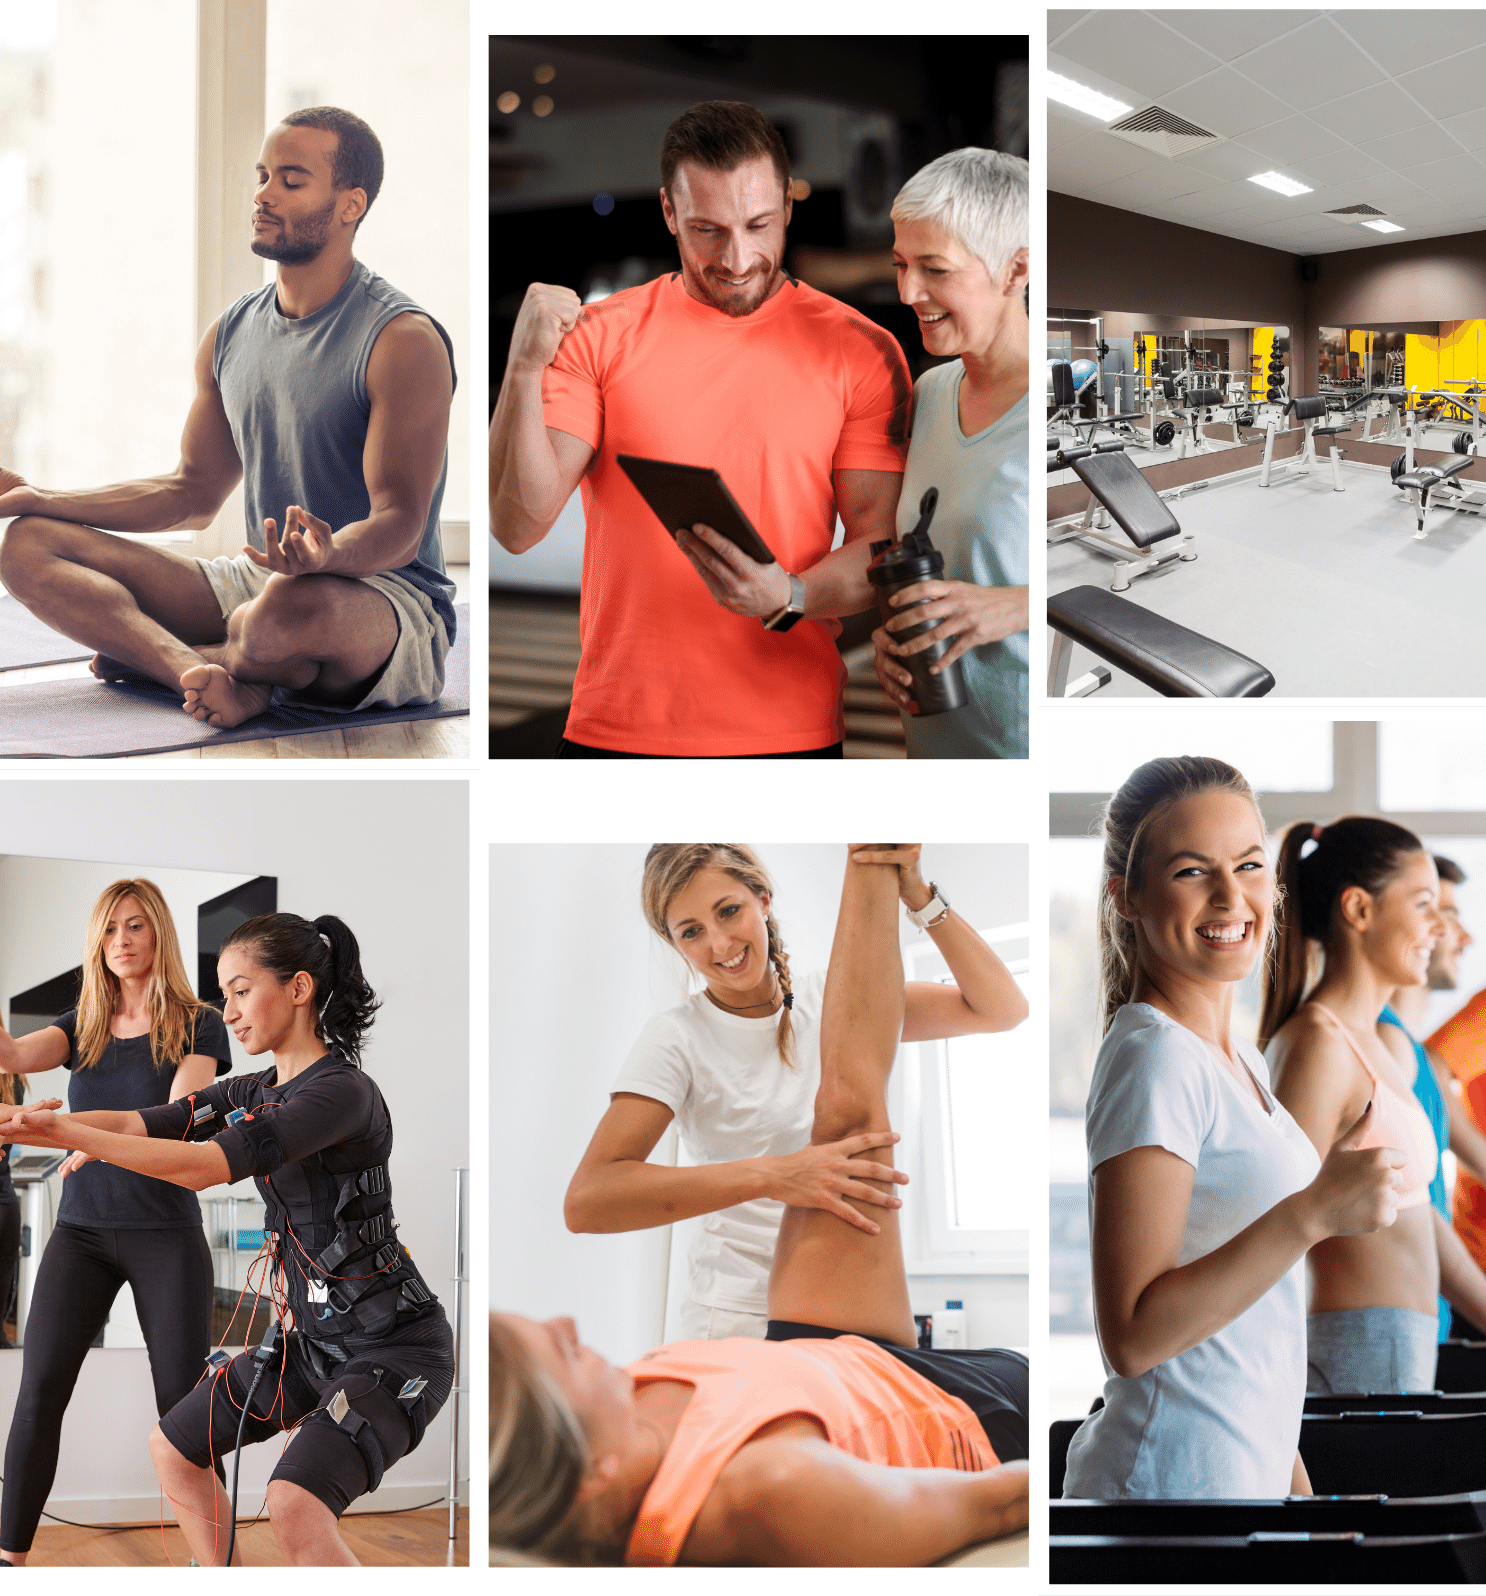 showcasing personal trainers, ems centres and gyms near me